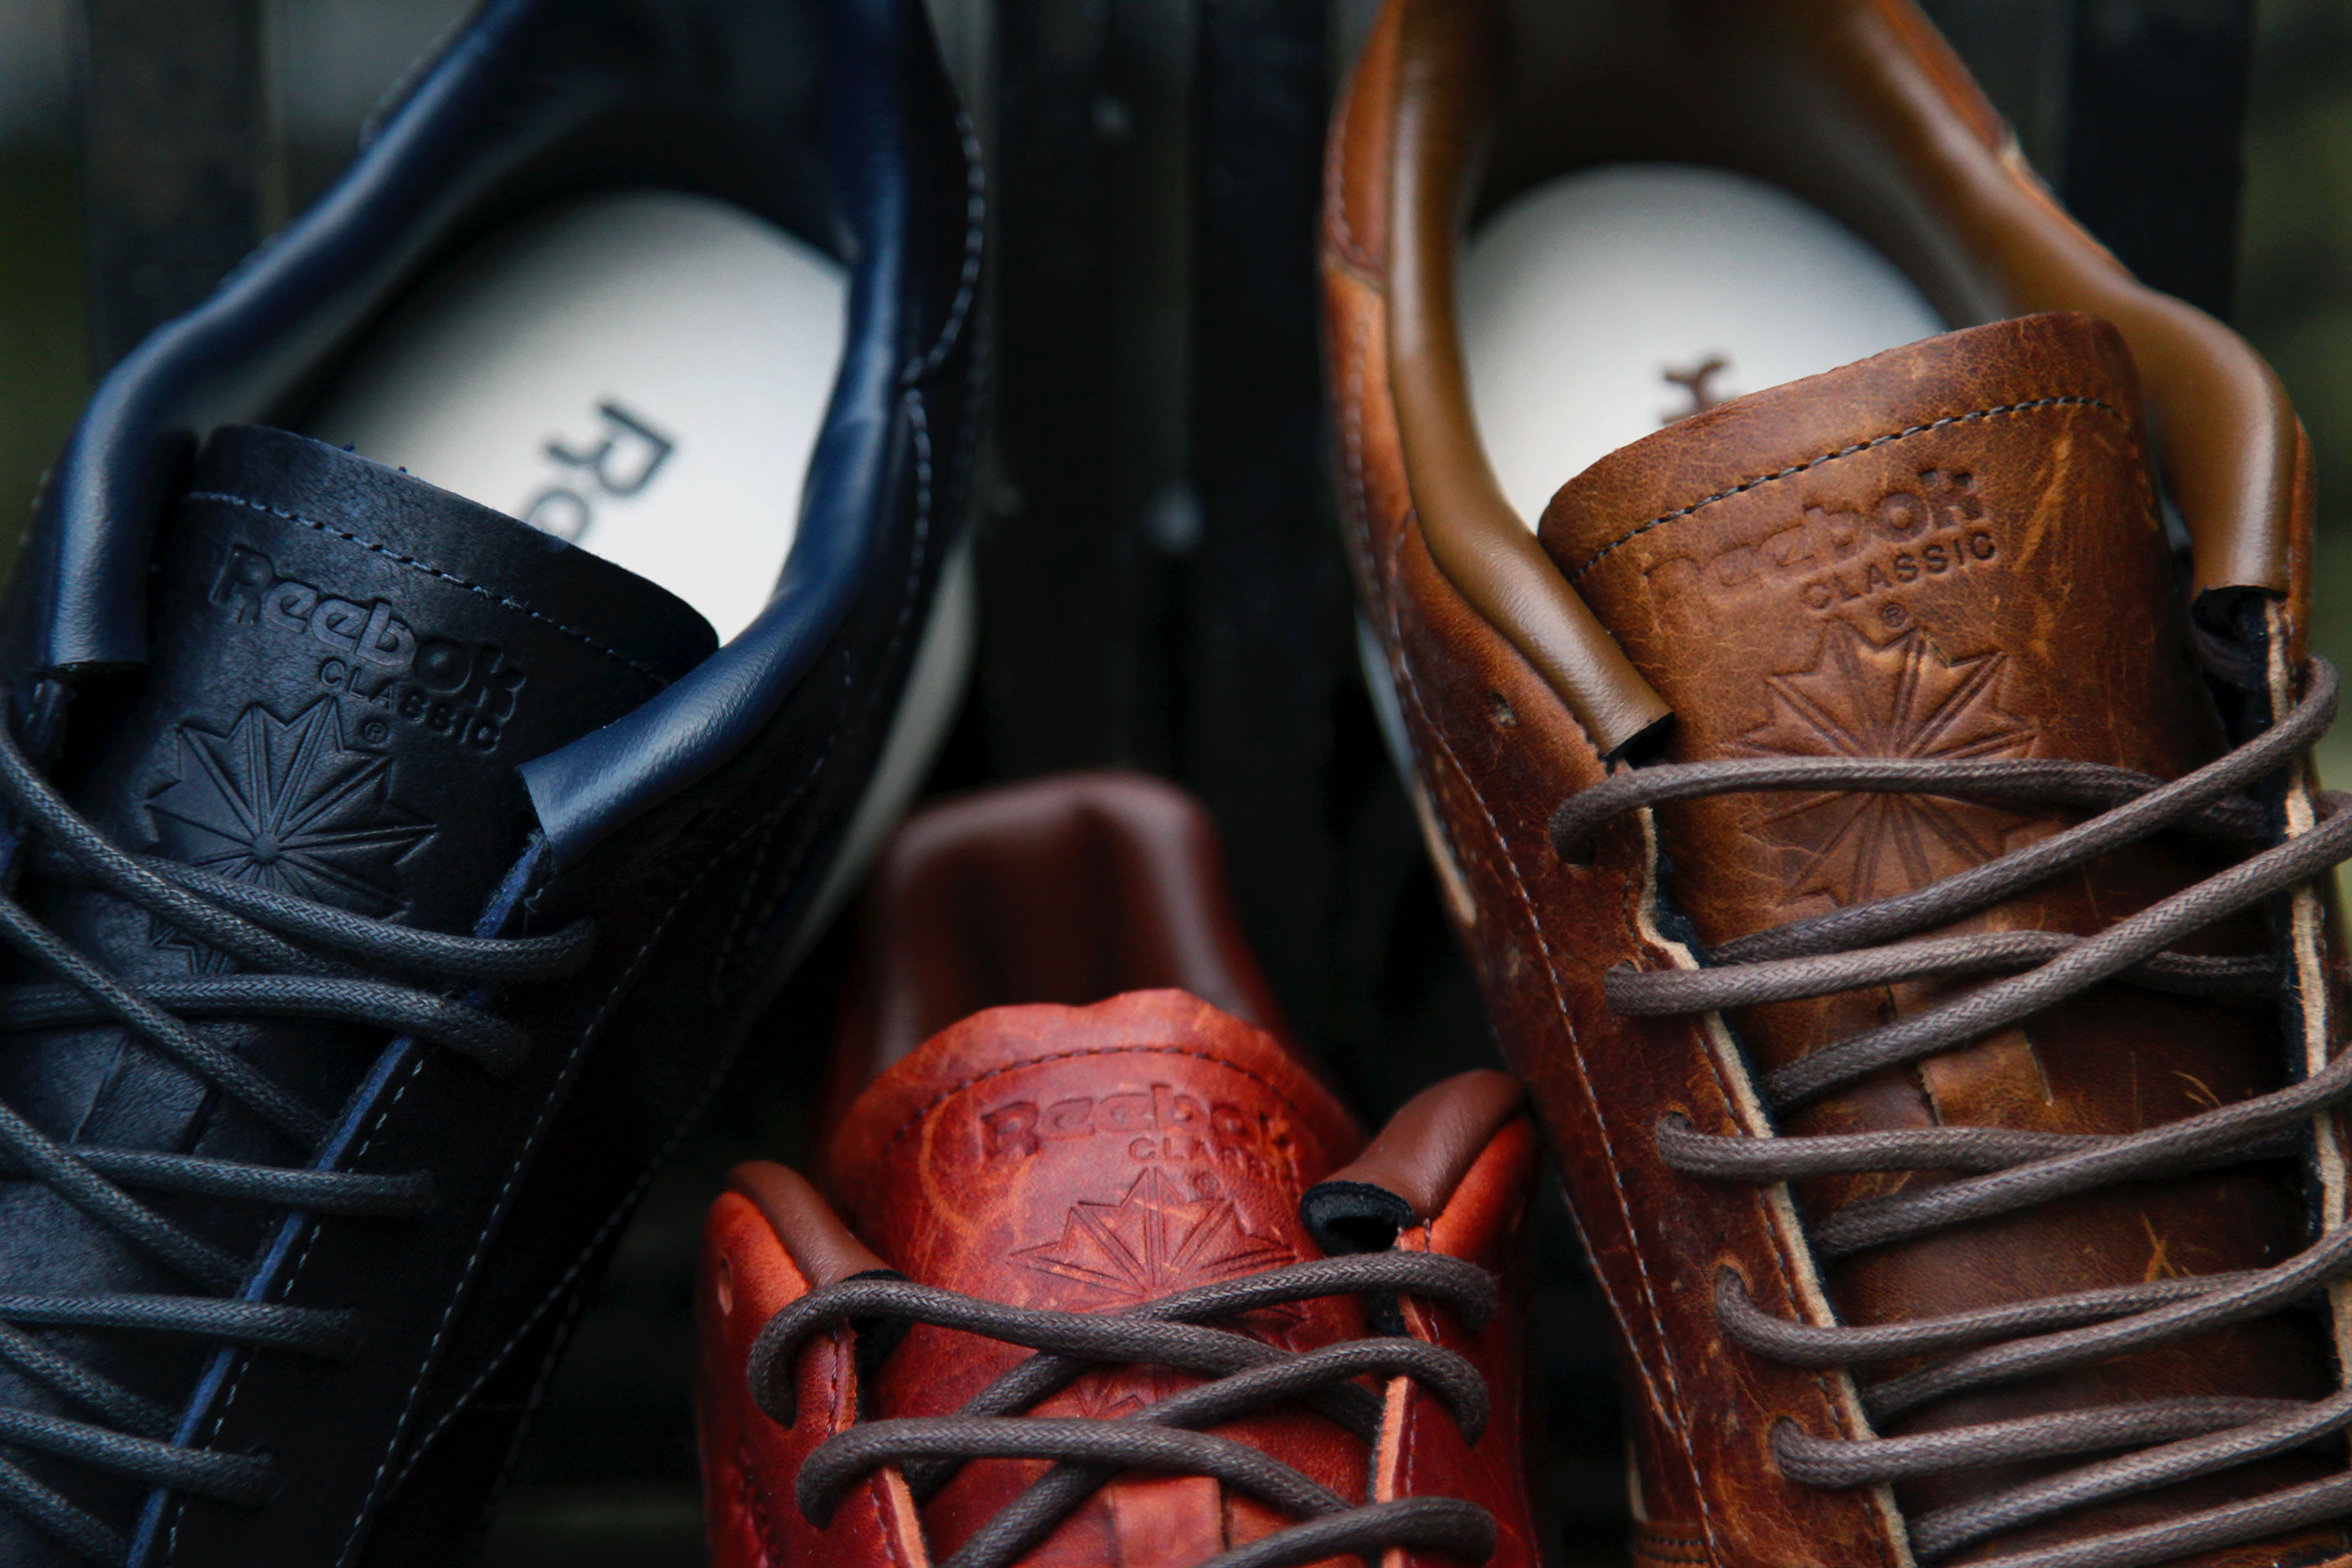 Horween x Reebok Classic Leather "Brogue" Pack